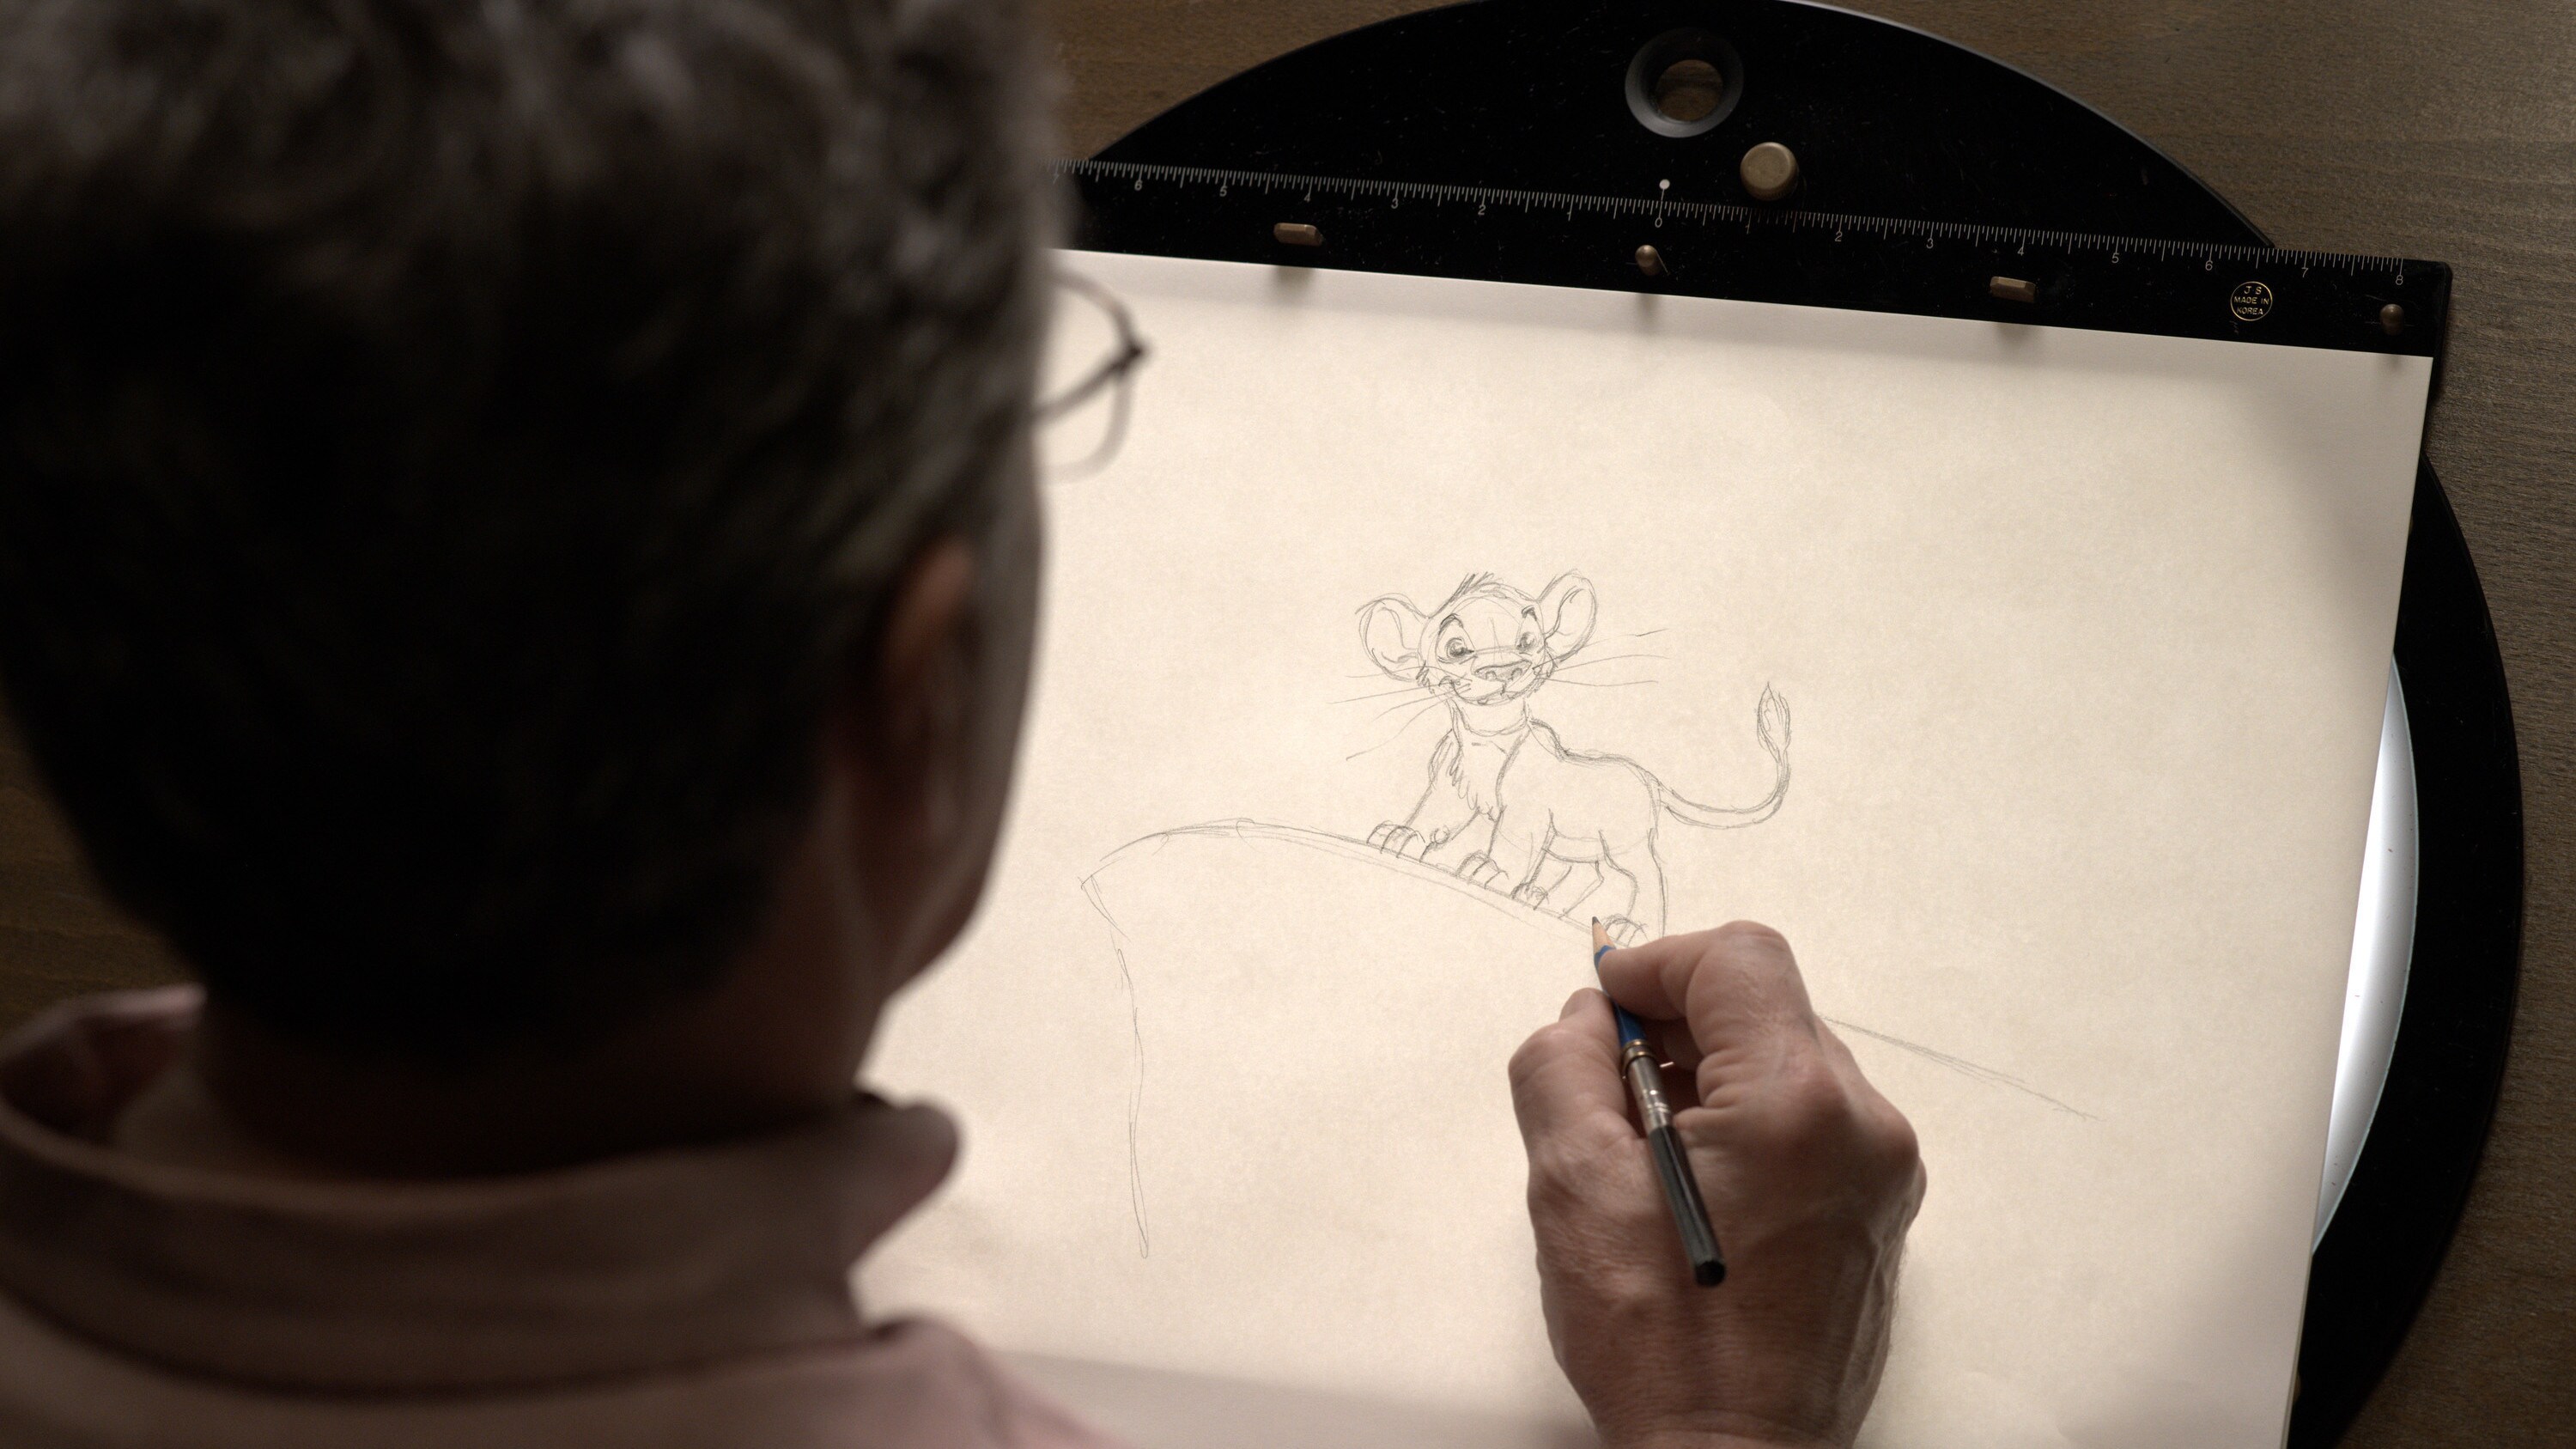 In his over 40 years with Disney, Mark Henn has been the Supervising Animator of Ariel, Belle, Jasmine, Tiana, Mulan, young Simba and more. In this episode of Sketchbook, Mark revisits the character young Simba. (Disney/Richard Harbaugh